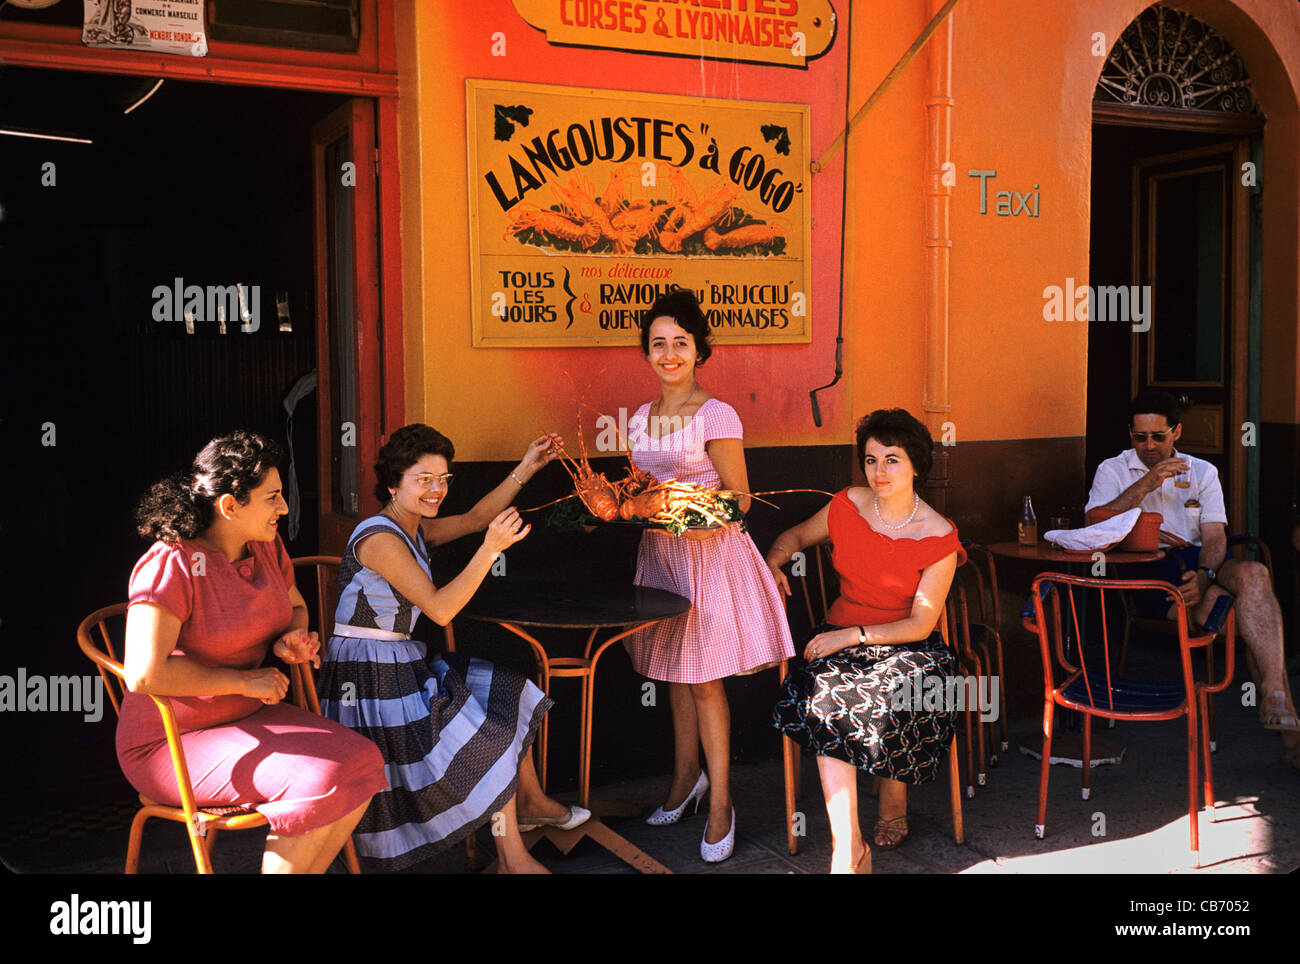 French Women 1950s or 1960s Outside a Seafood Restaurant Specializing in Lobster, Porto Vecchio, Corsica, France Stock Photo